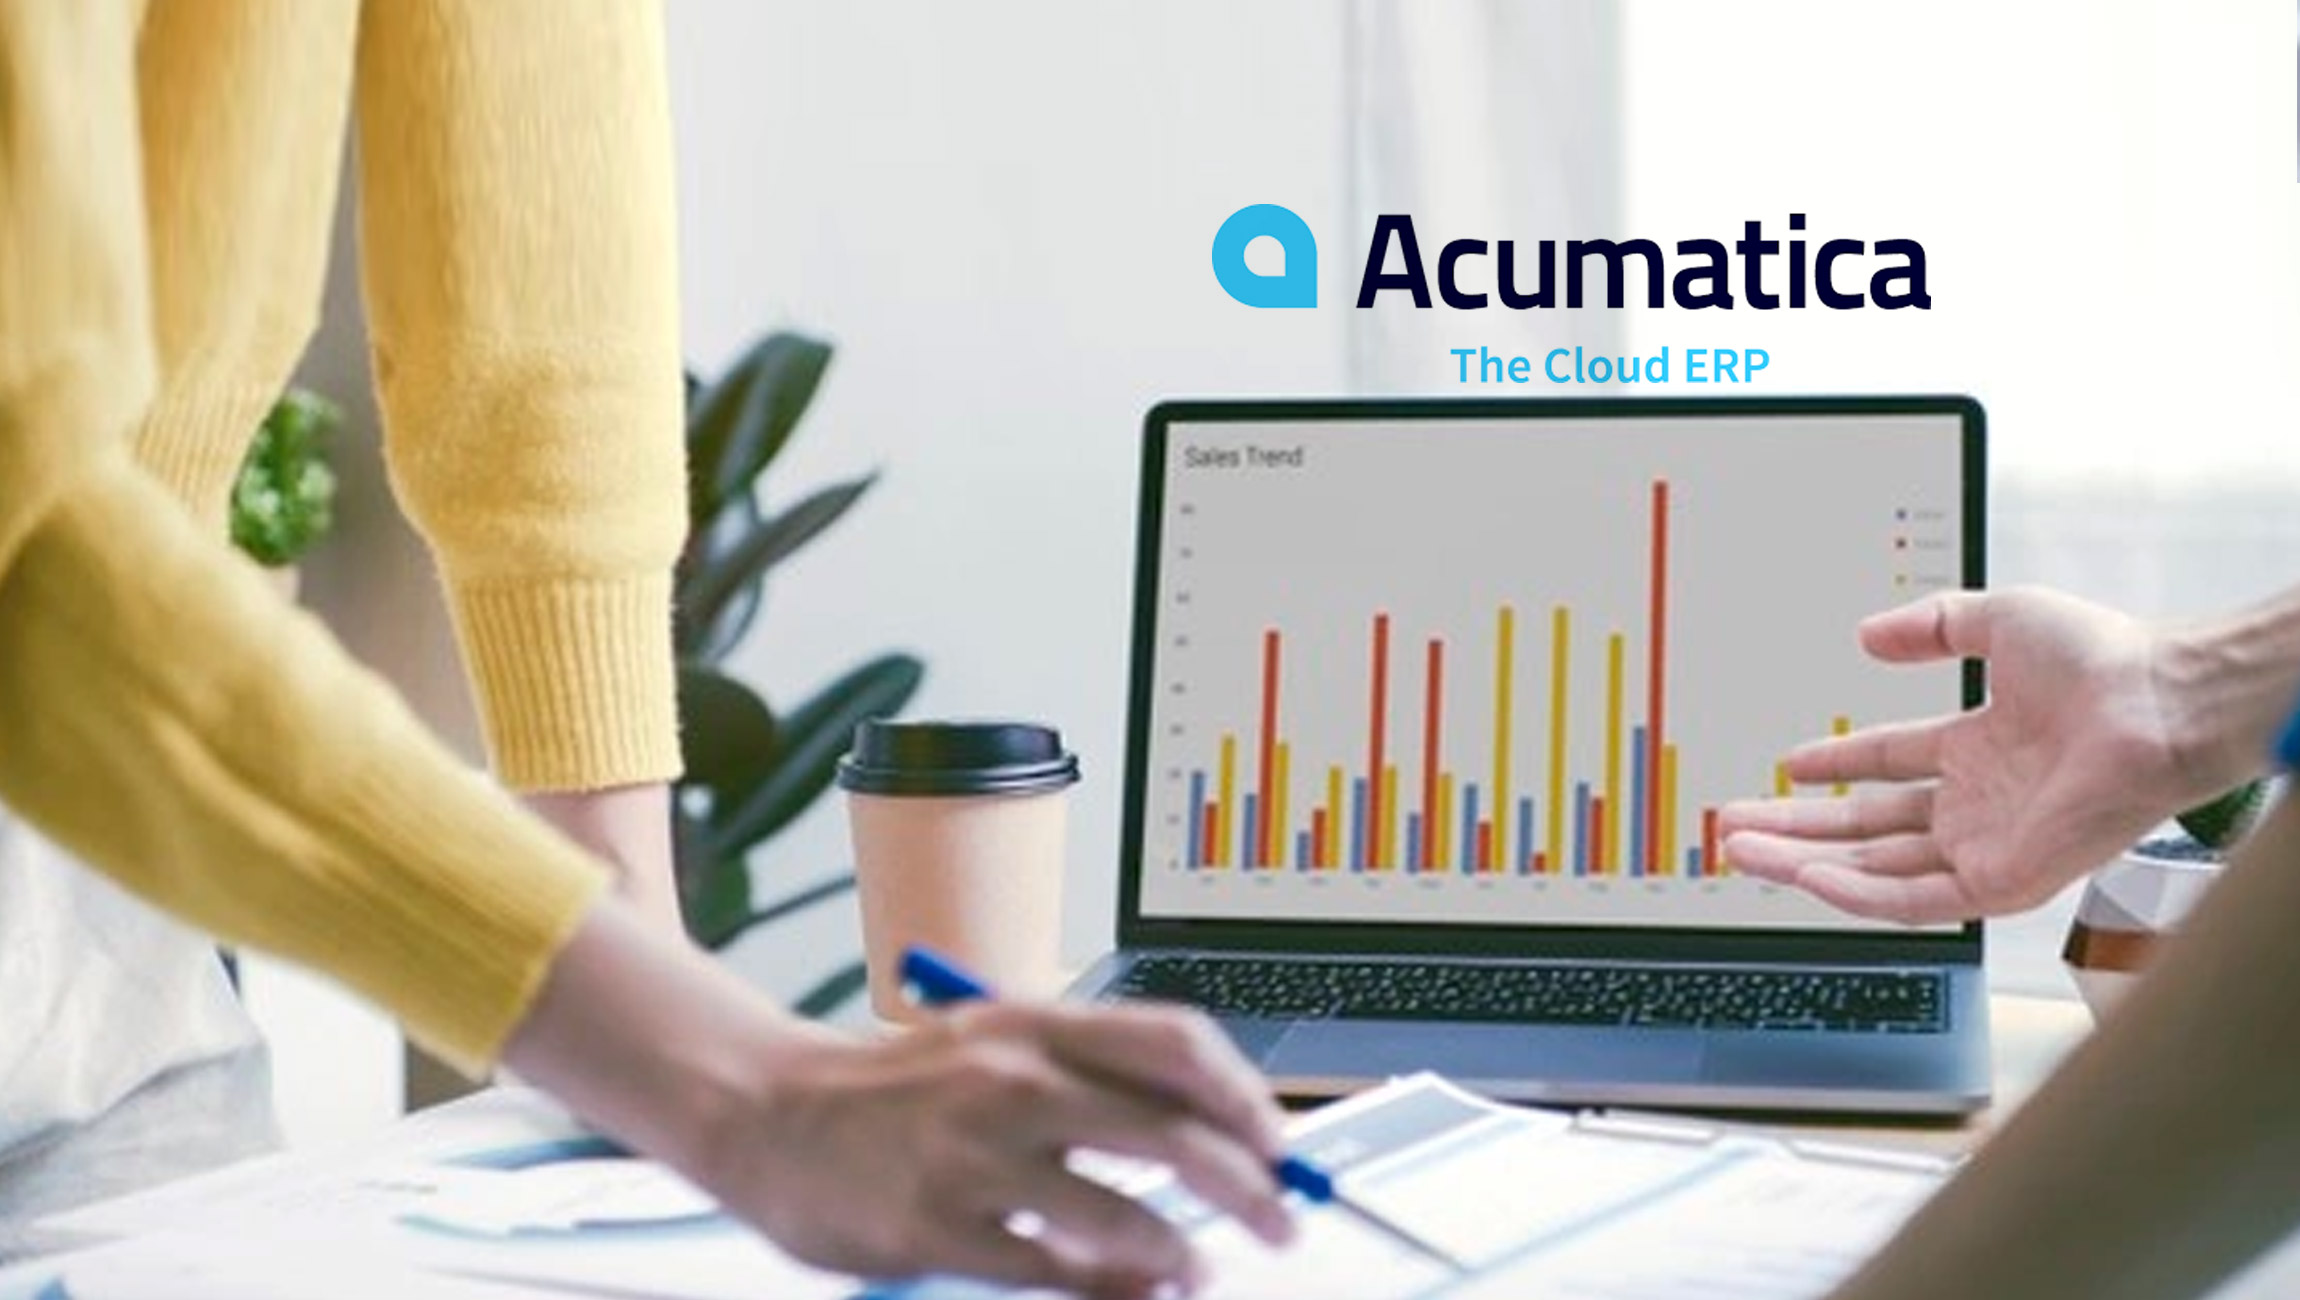 Acumatica Ranks No. 1 in G2 Spring 2022 Reports